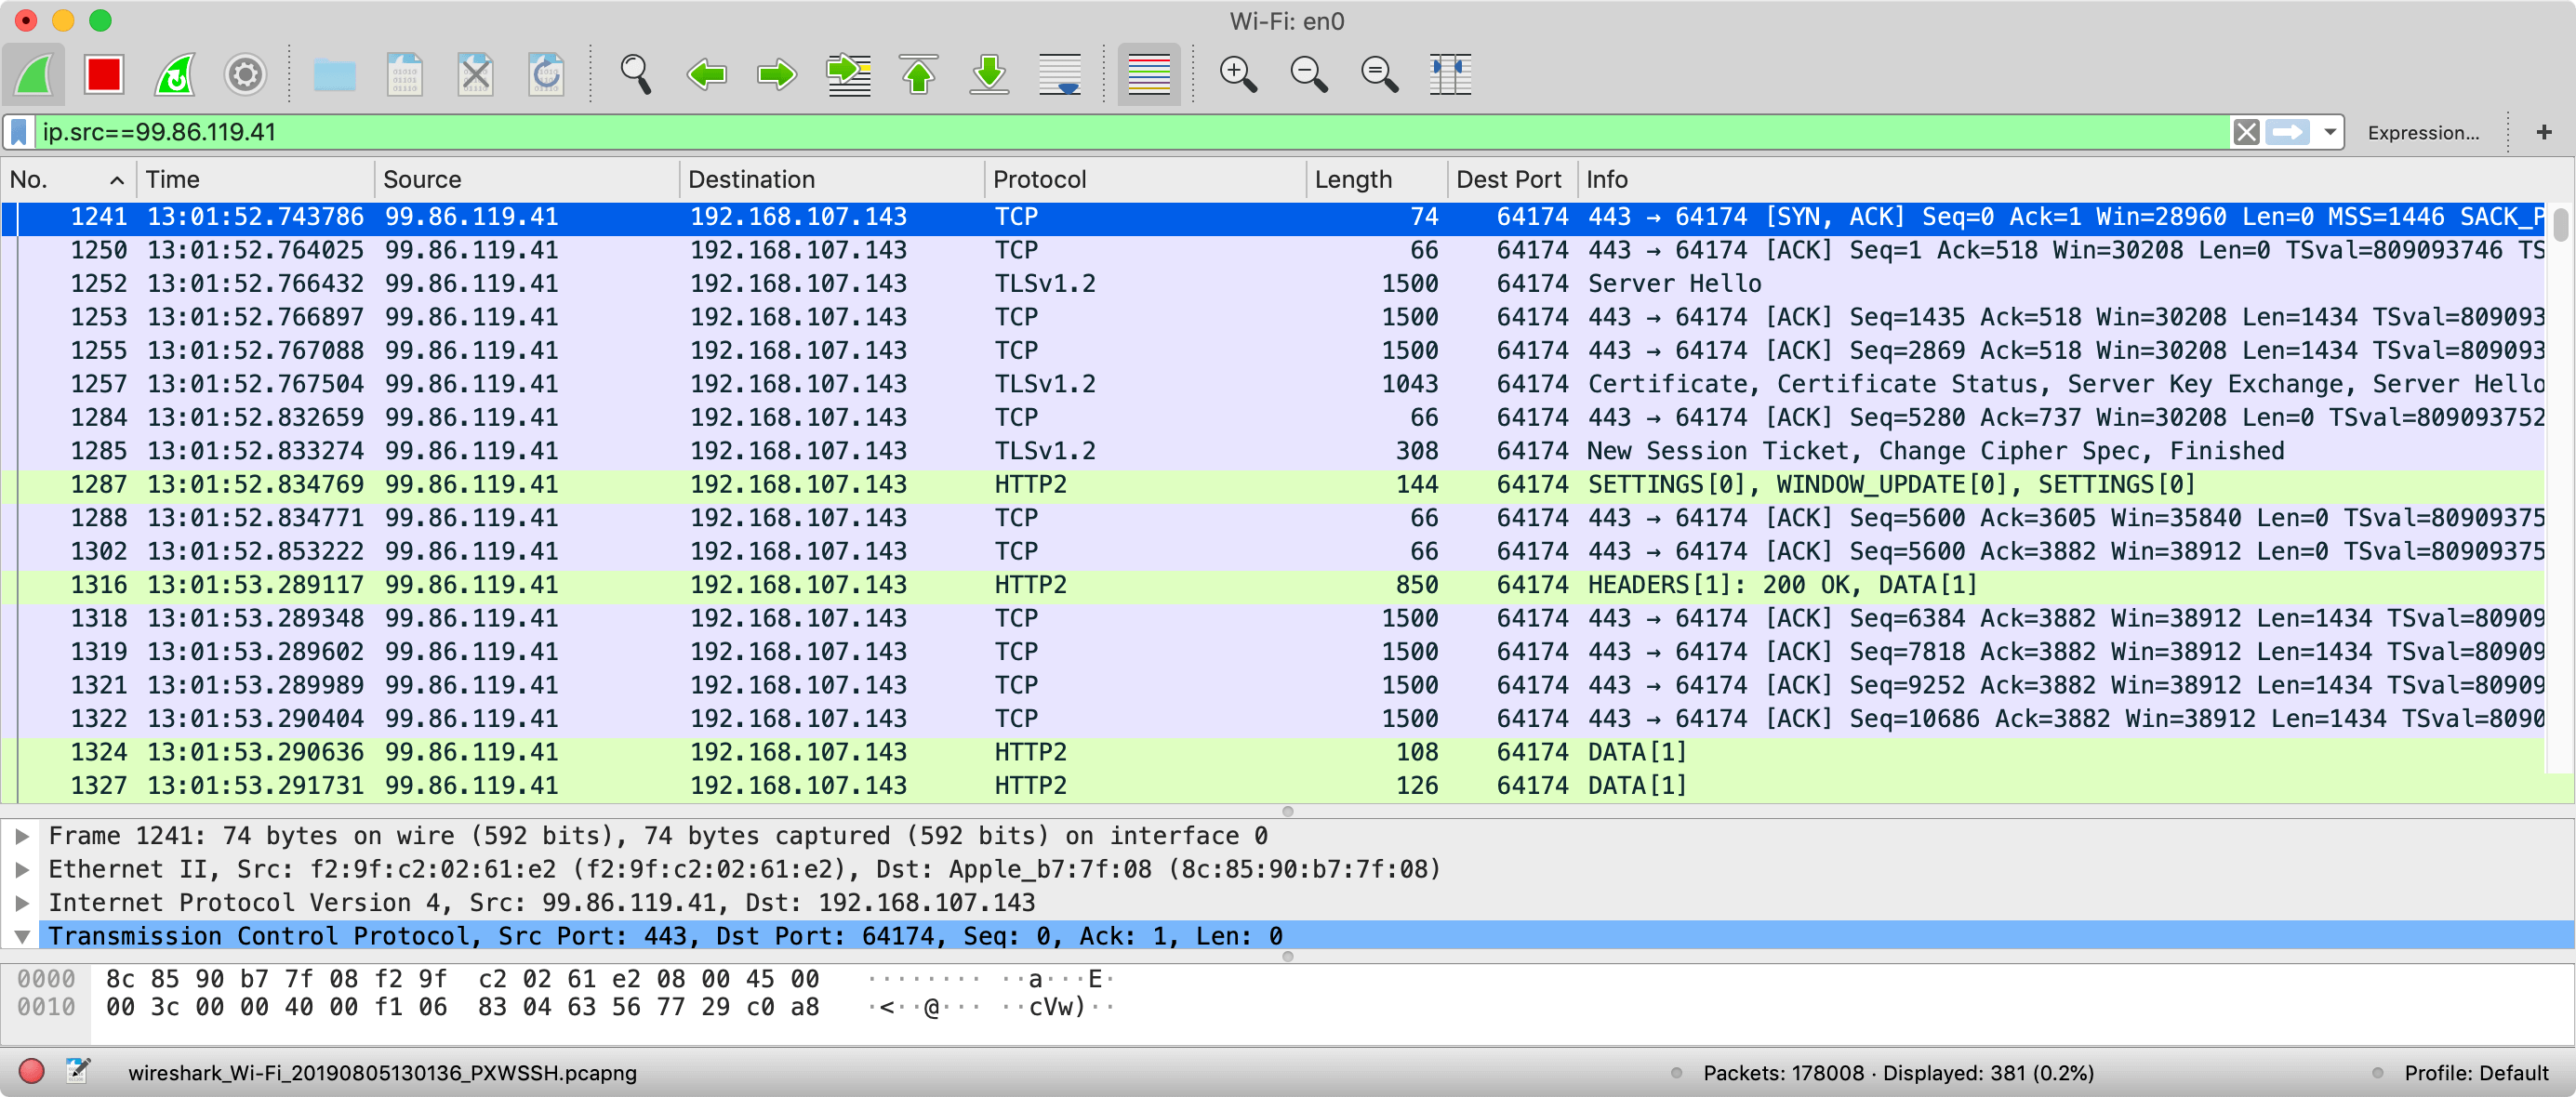 Viewing download of Amazon Homepage in Wireshark from server perspective